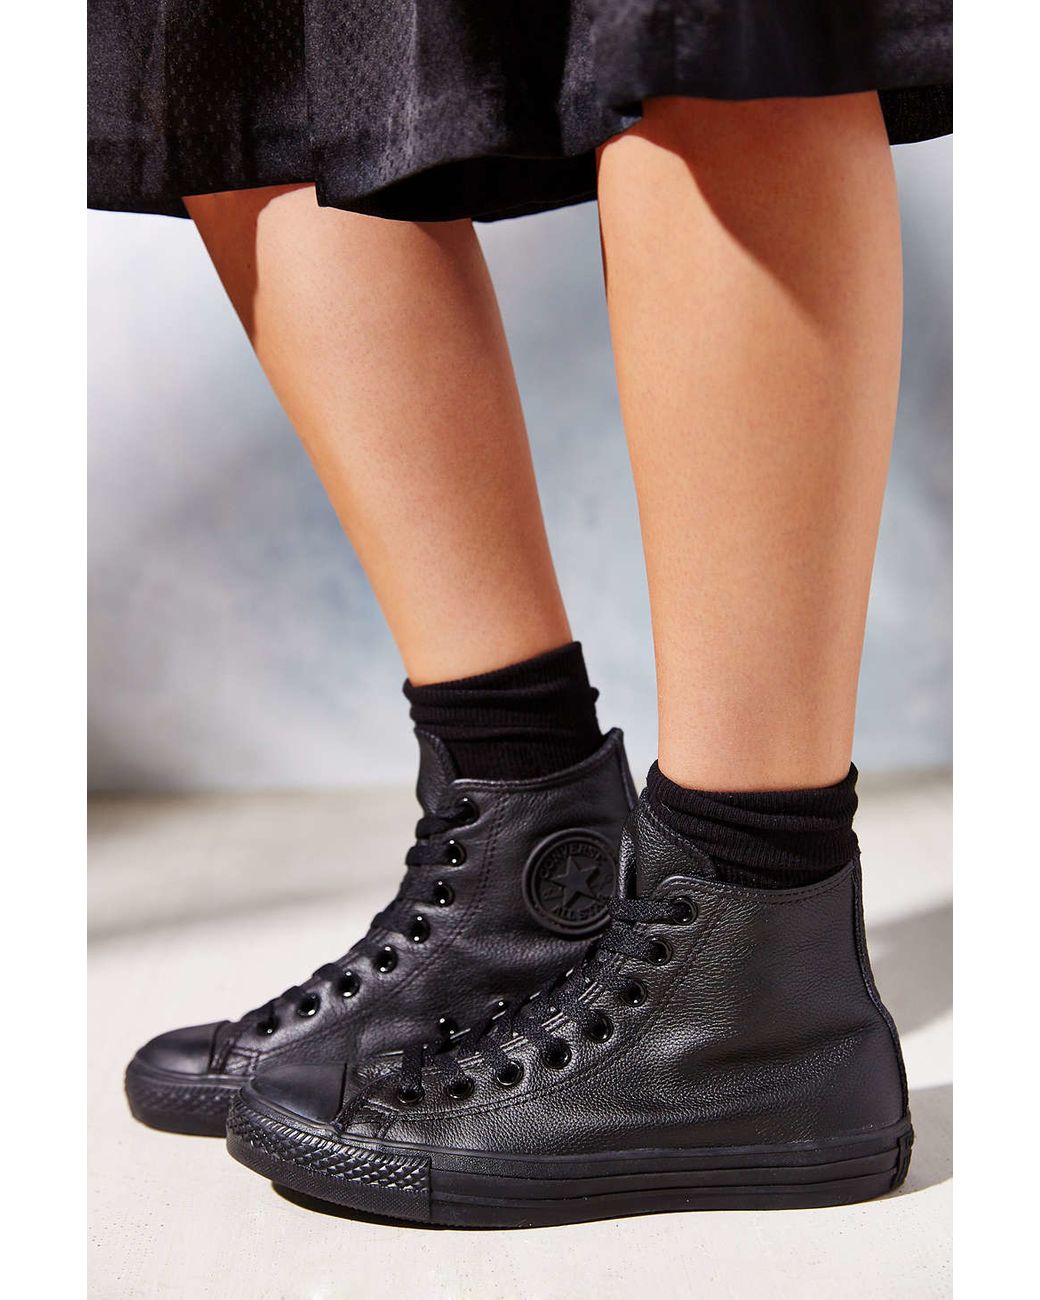 Converse Chuck Taylor All Star Leather High Top Sneaker in Black | Lyst